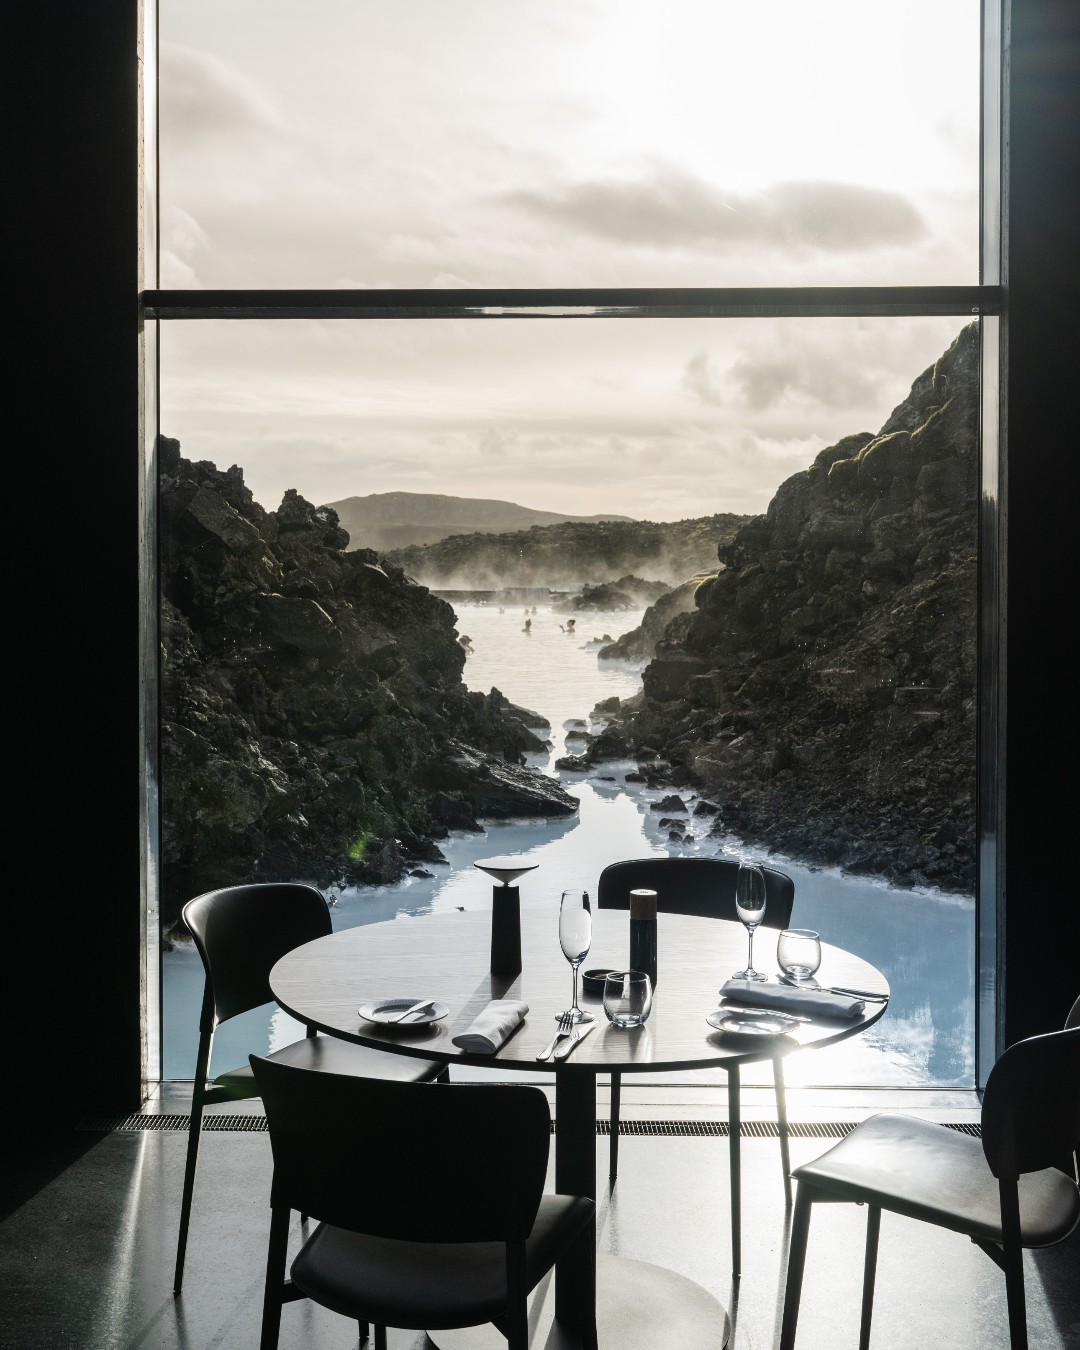 With sweeping floor-to-ceiling views of the Blue Lagoon, a meal at Lava Restaurant is the perfect way to end a relaxing day